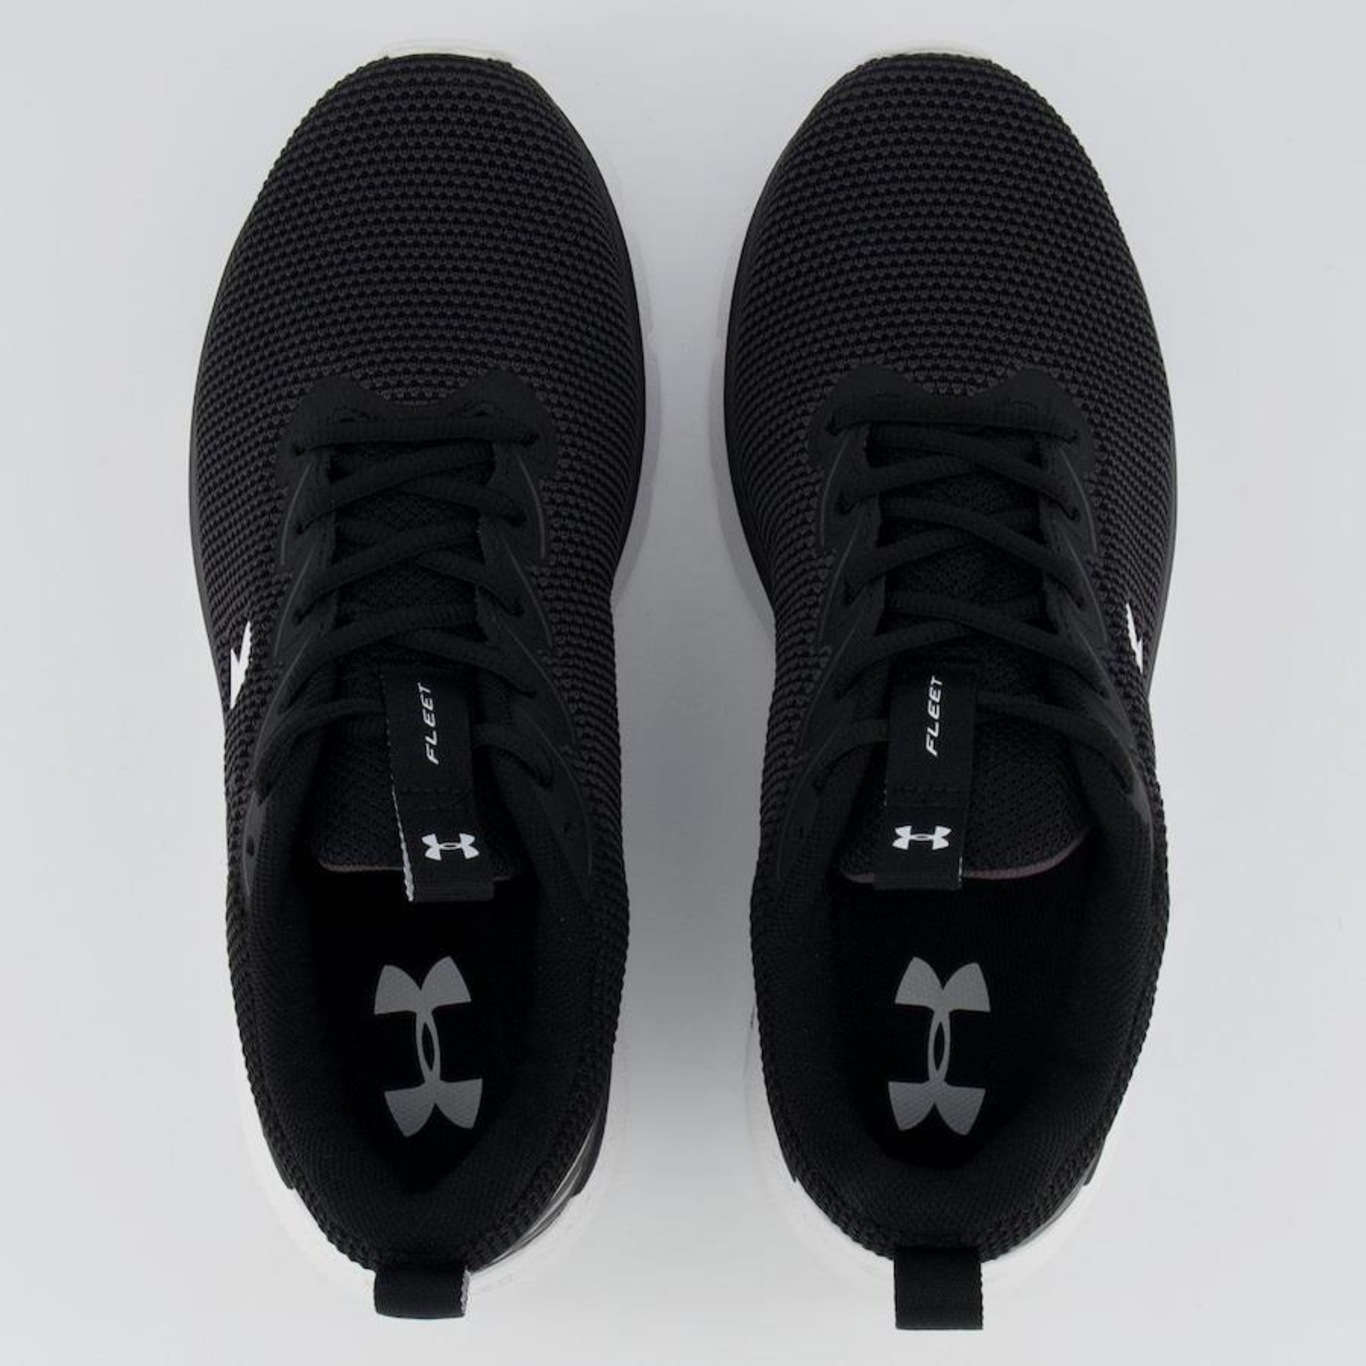 Tênis Under Armour Charged Fleet Masculino